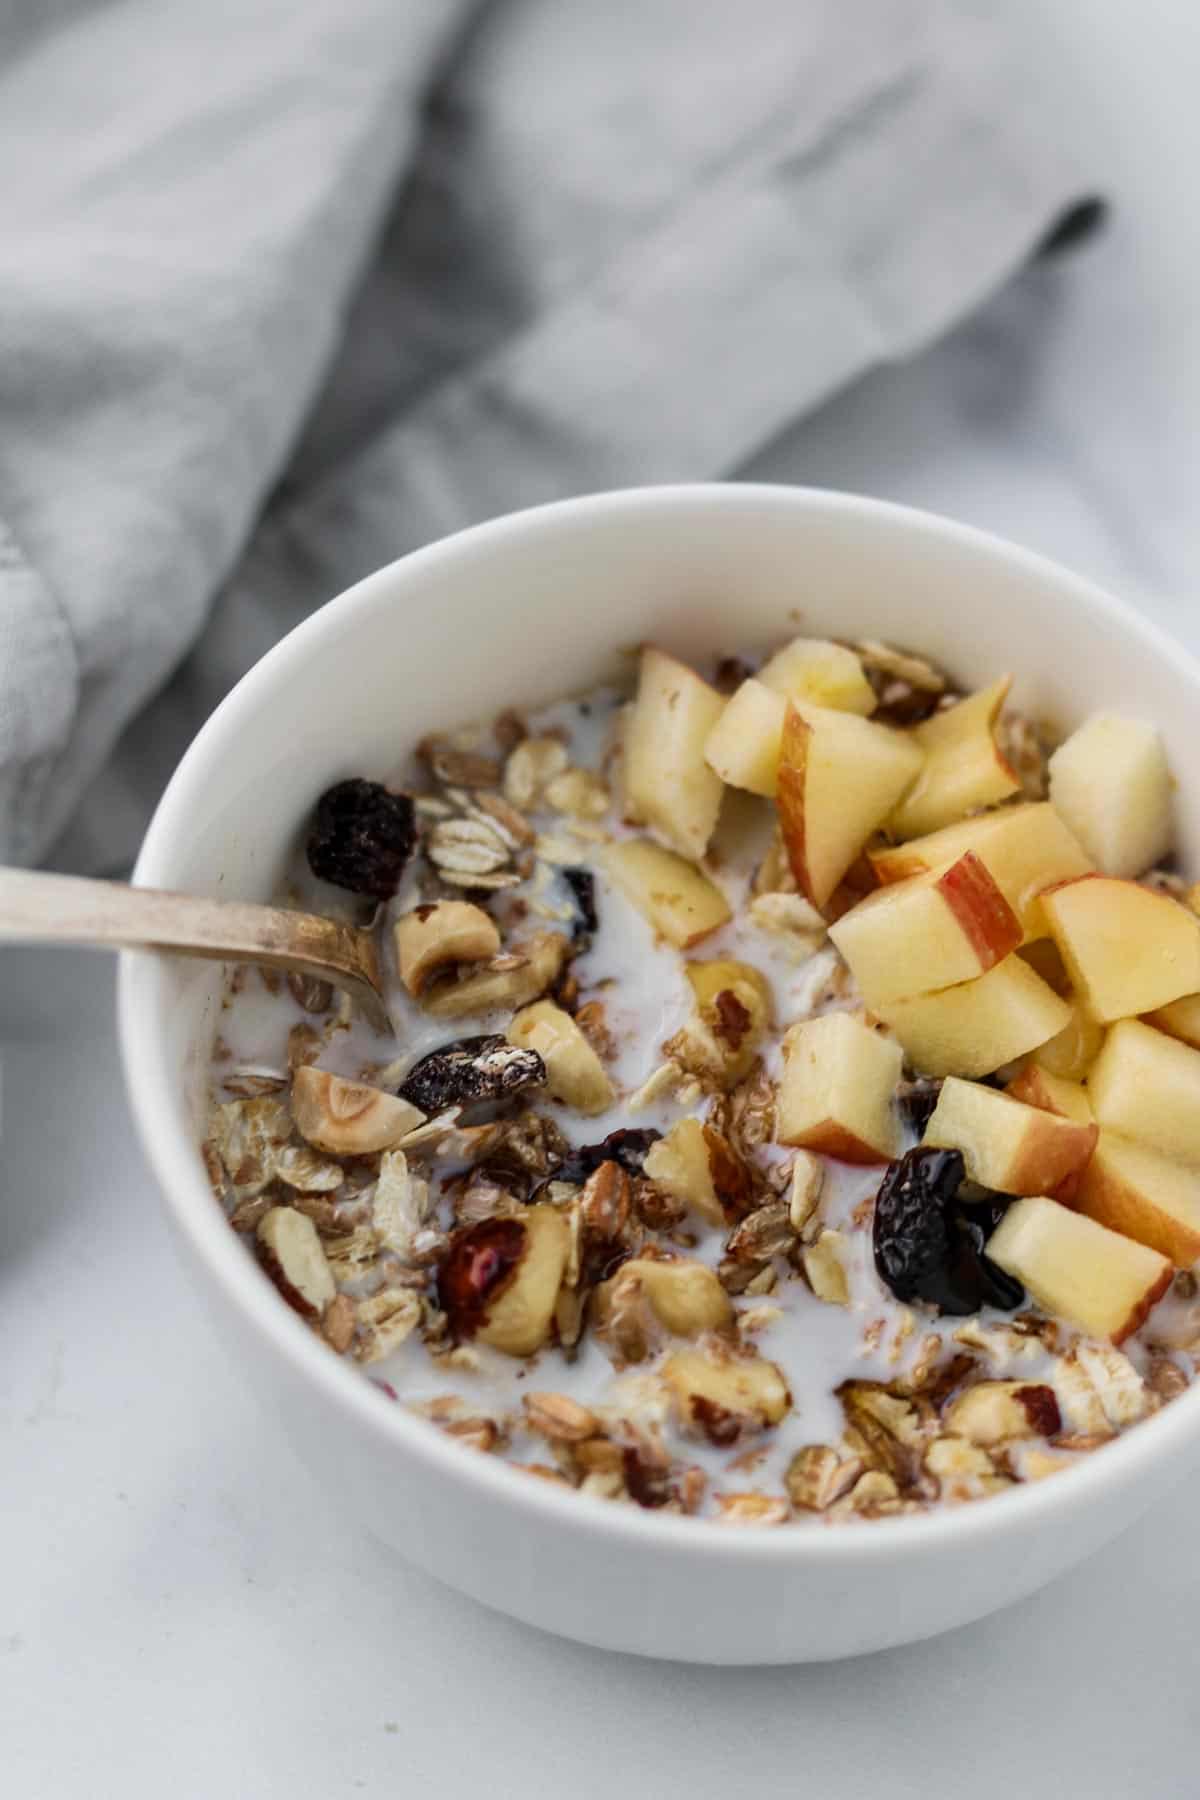 A bowl of muesli with chopped apples next to a napkin.